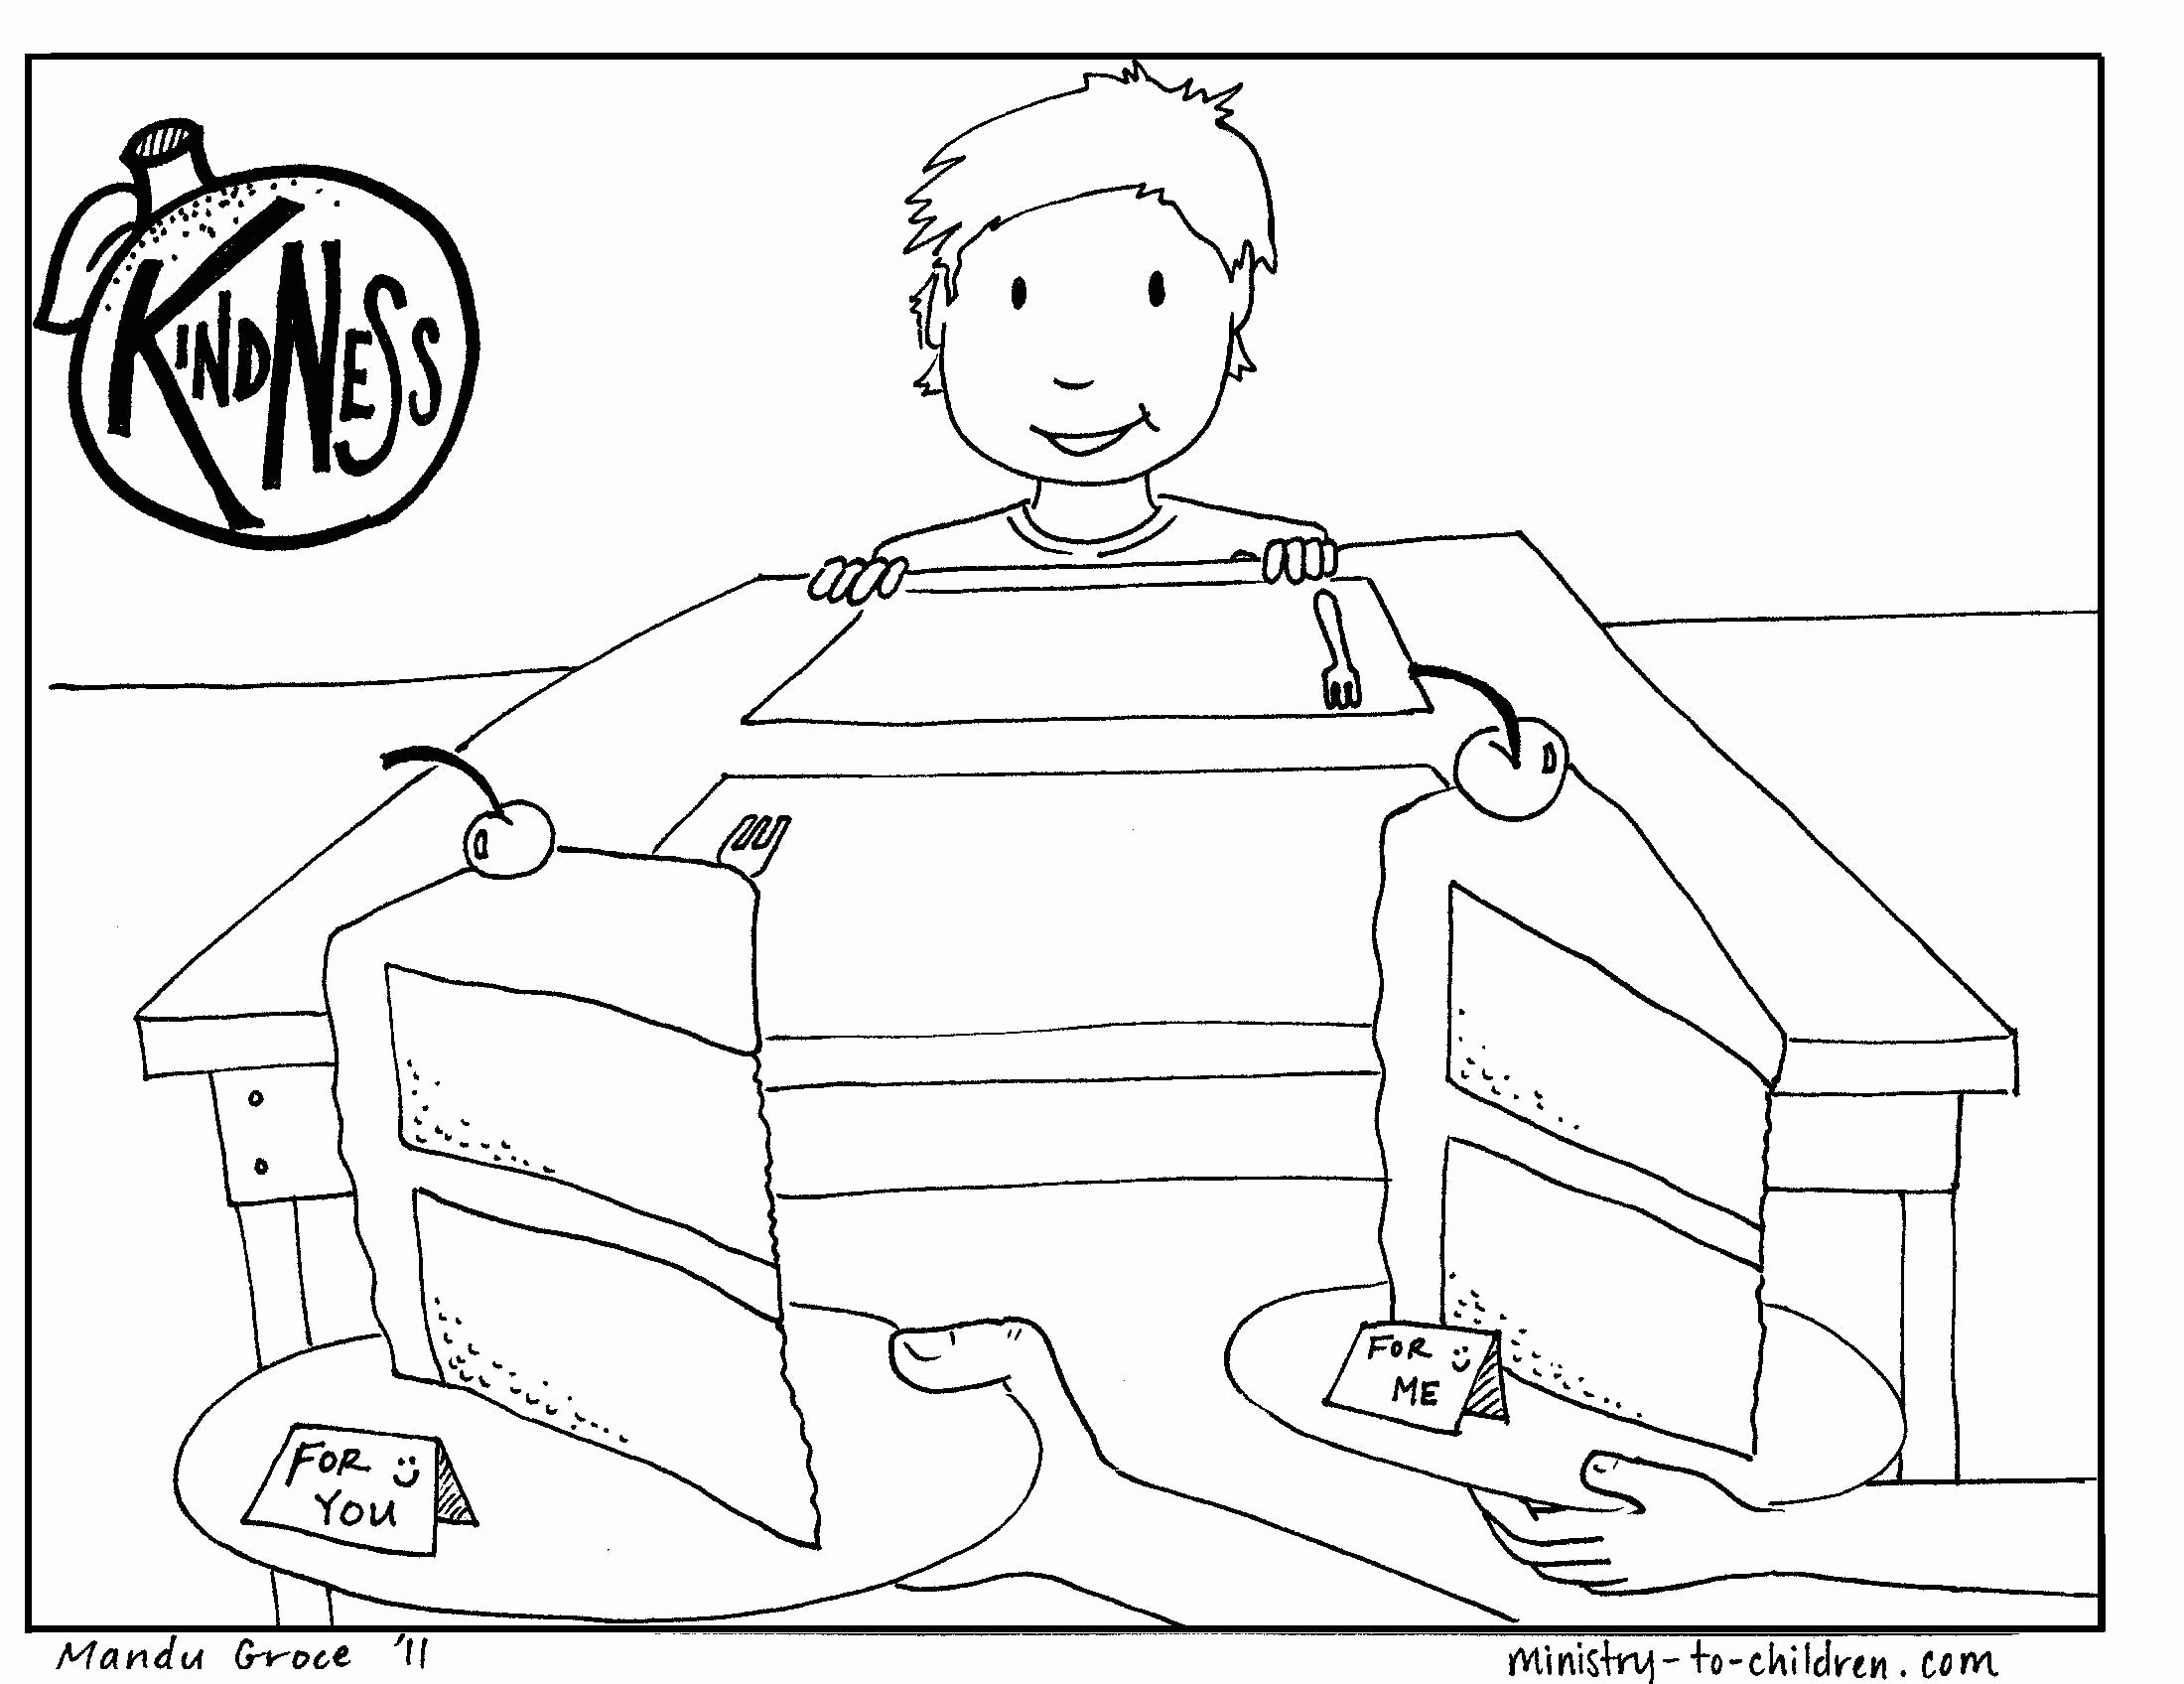 Kindness Coloring Pages Kindness Coloring Pages Coloring Home